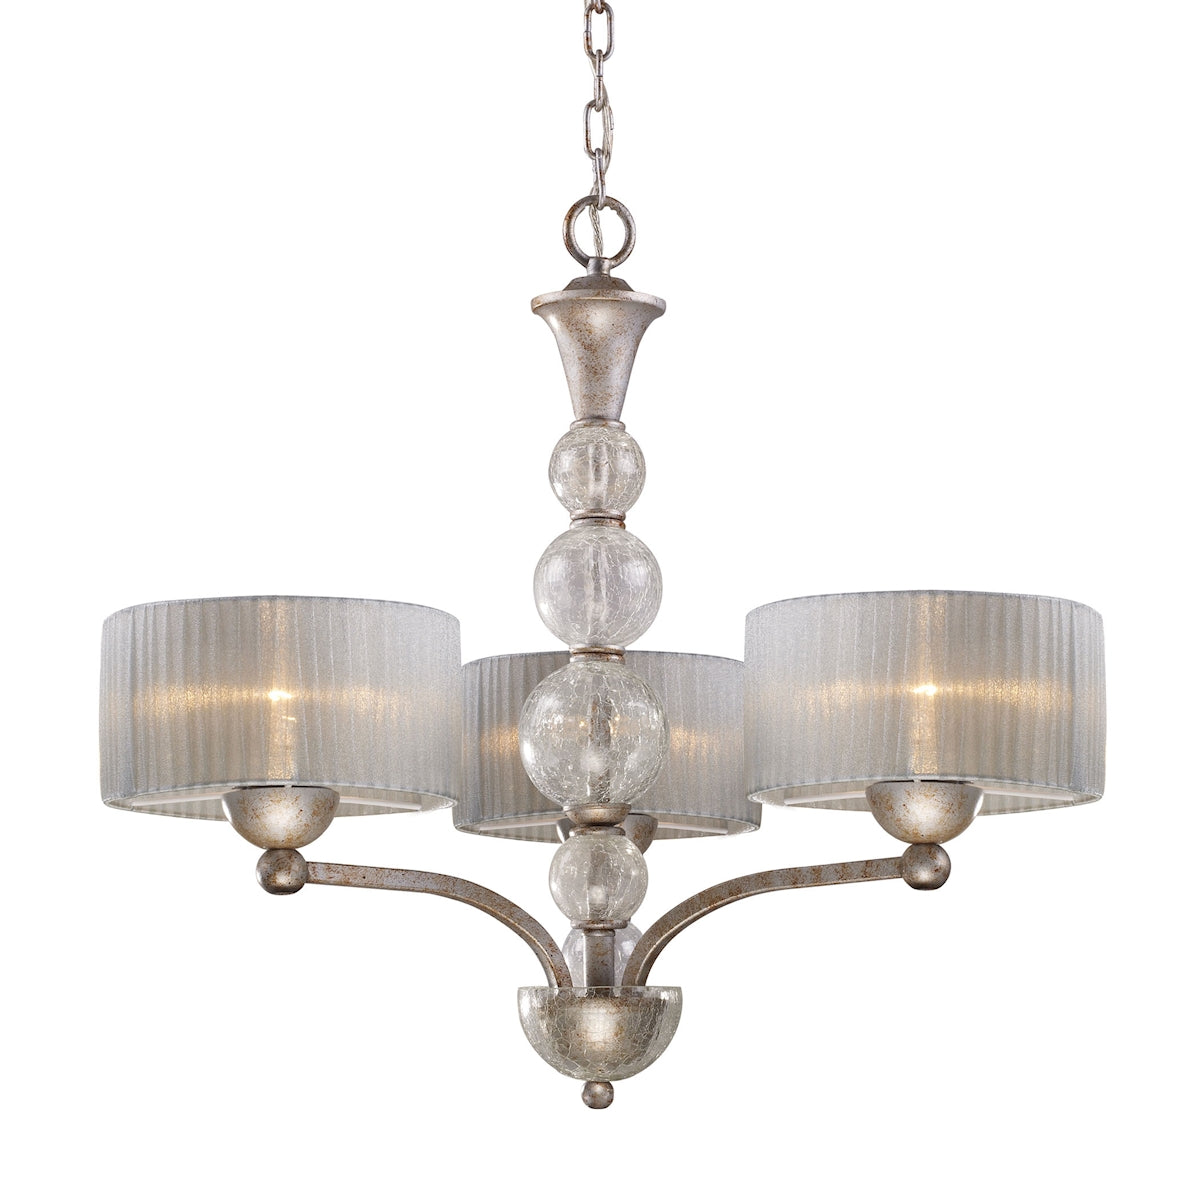 ELK Lighting 20008/3 Alexis 3-Light Chandelier in Antique Silver with Translucent Silver Fabric Shade